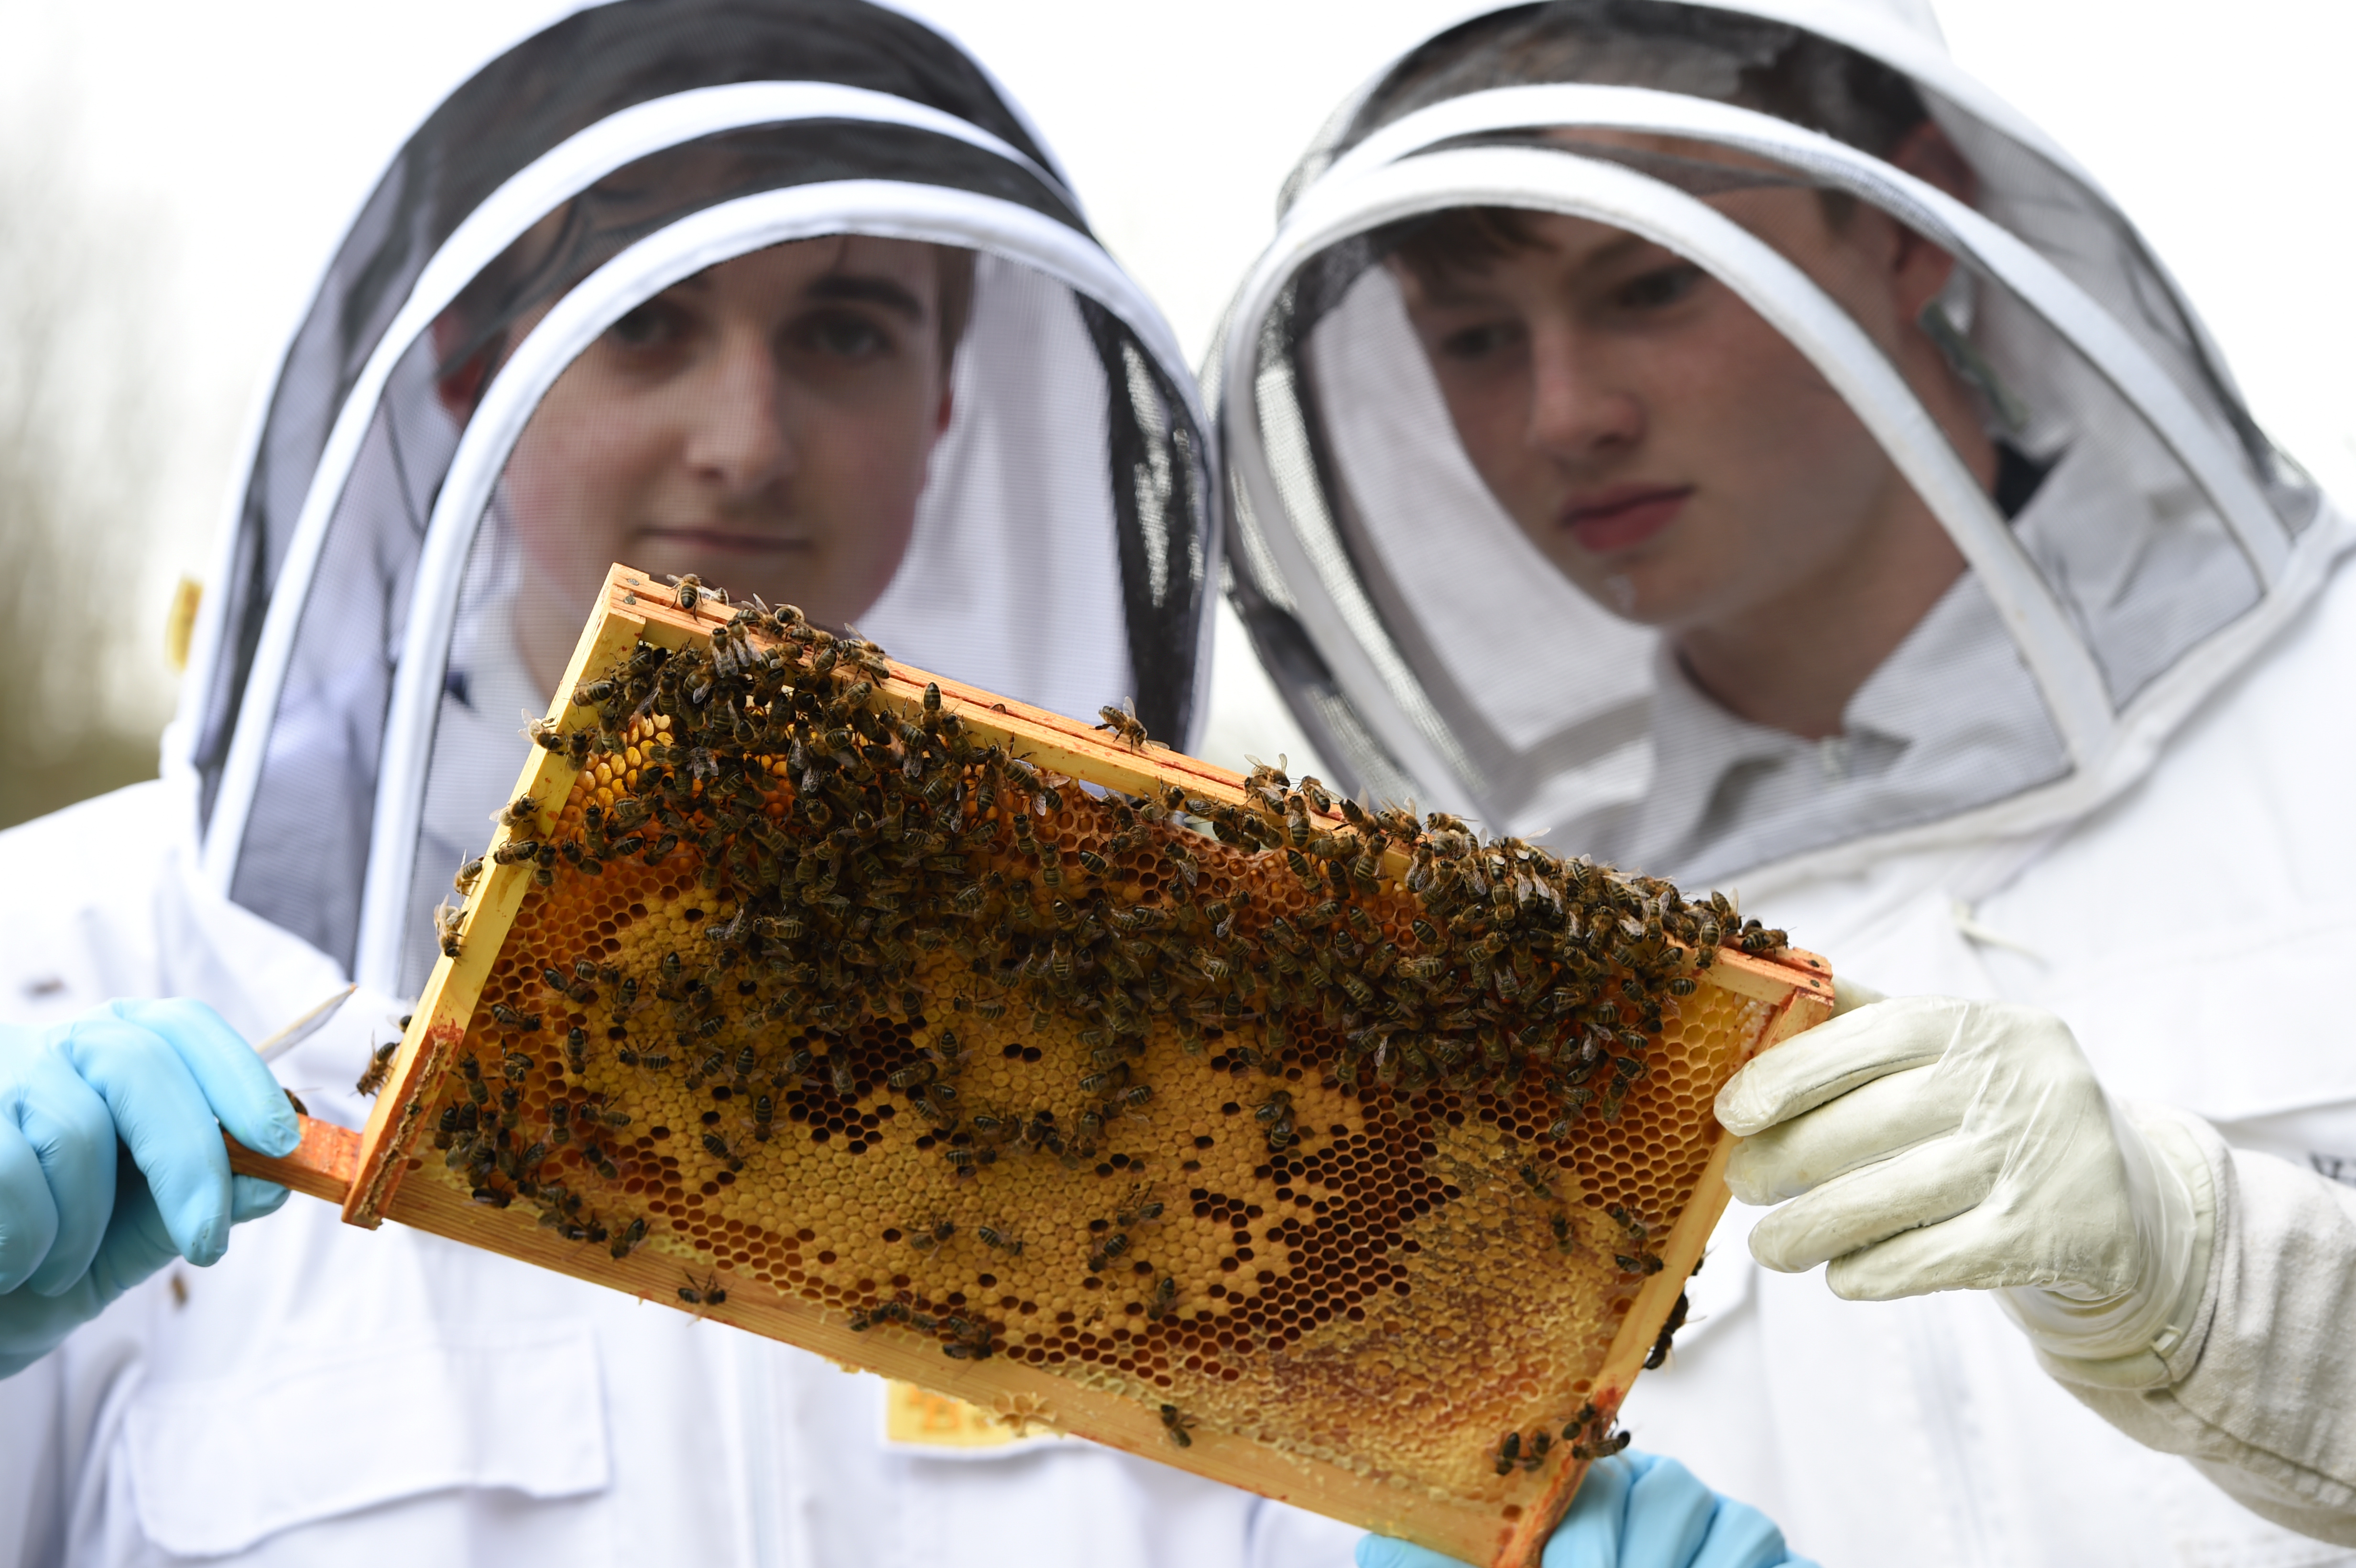 Martin Leahy and fellow young beekeeper Sean Dinnie